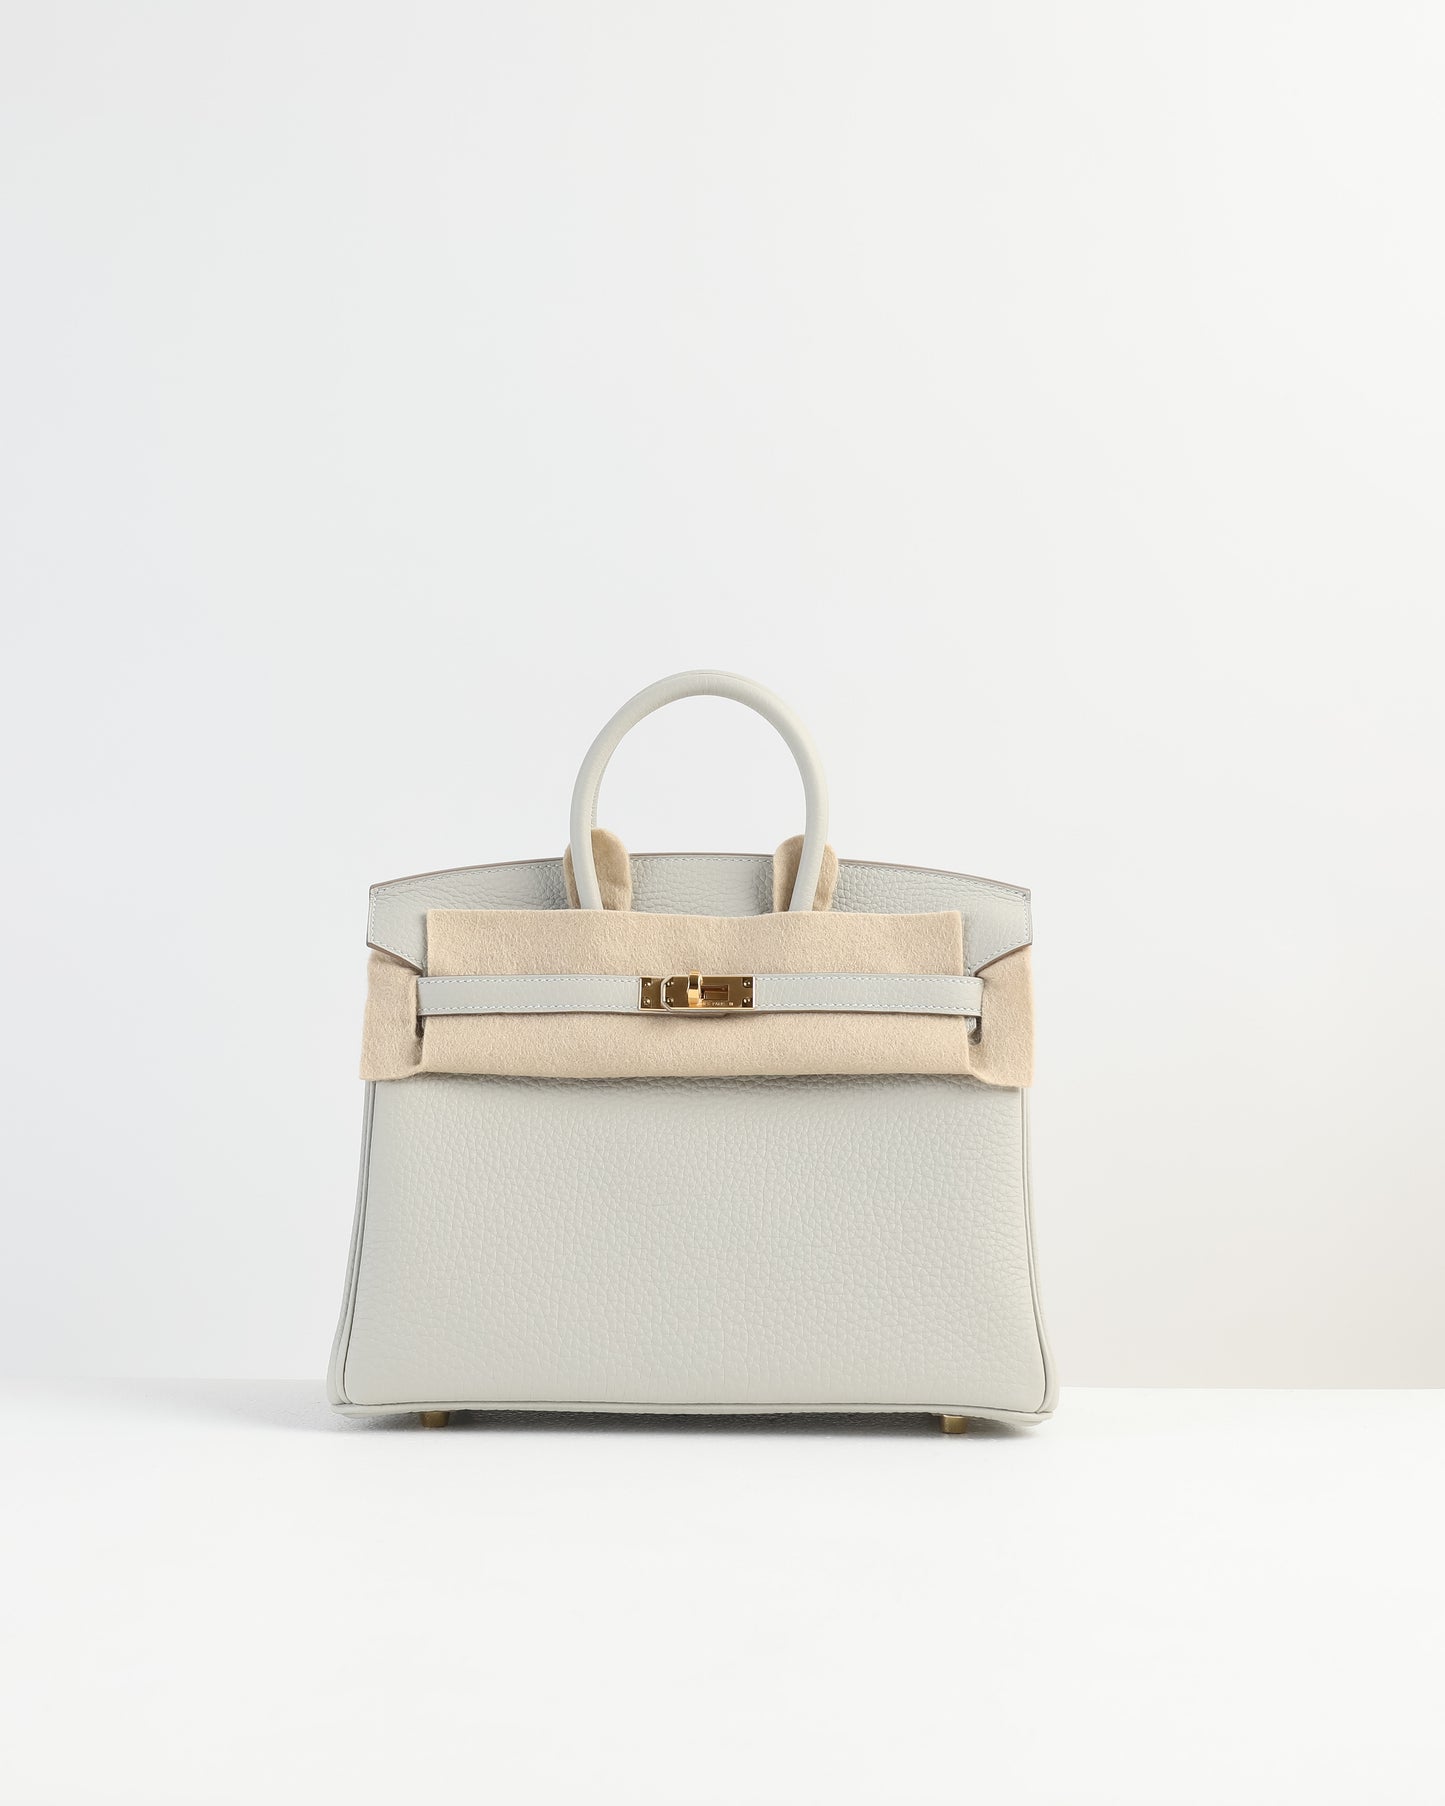 Birkin 25 Gris Perle in Togo Leather with Gold Hardware